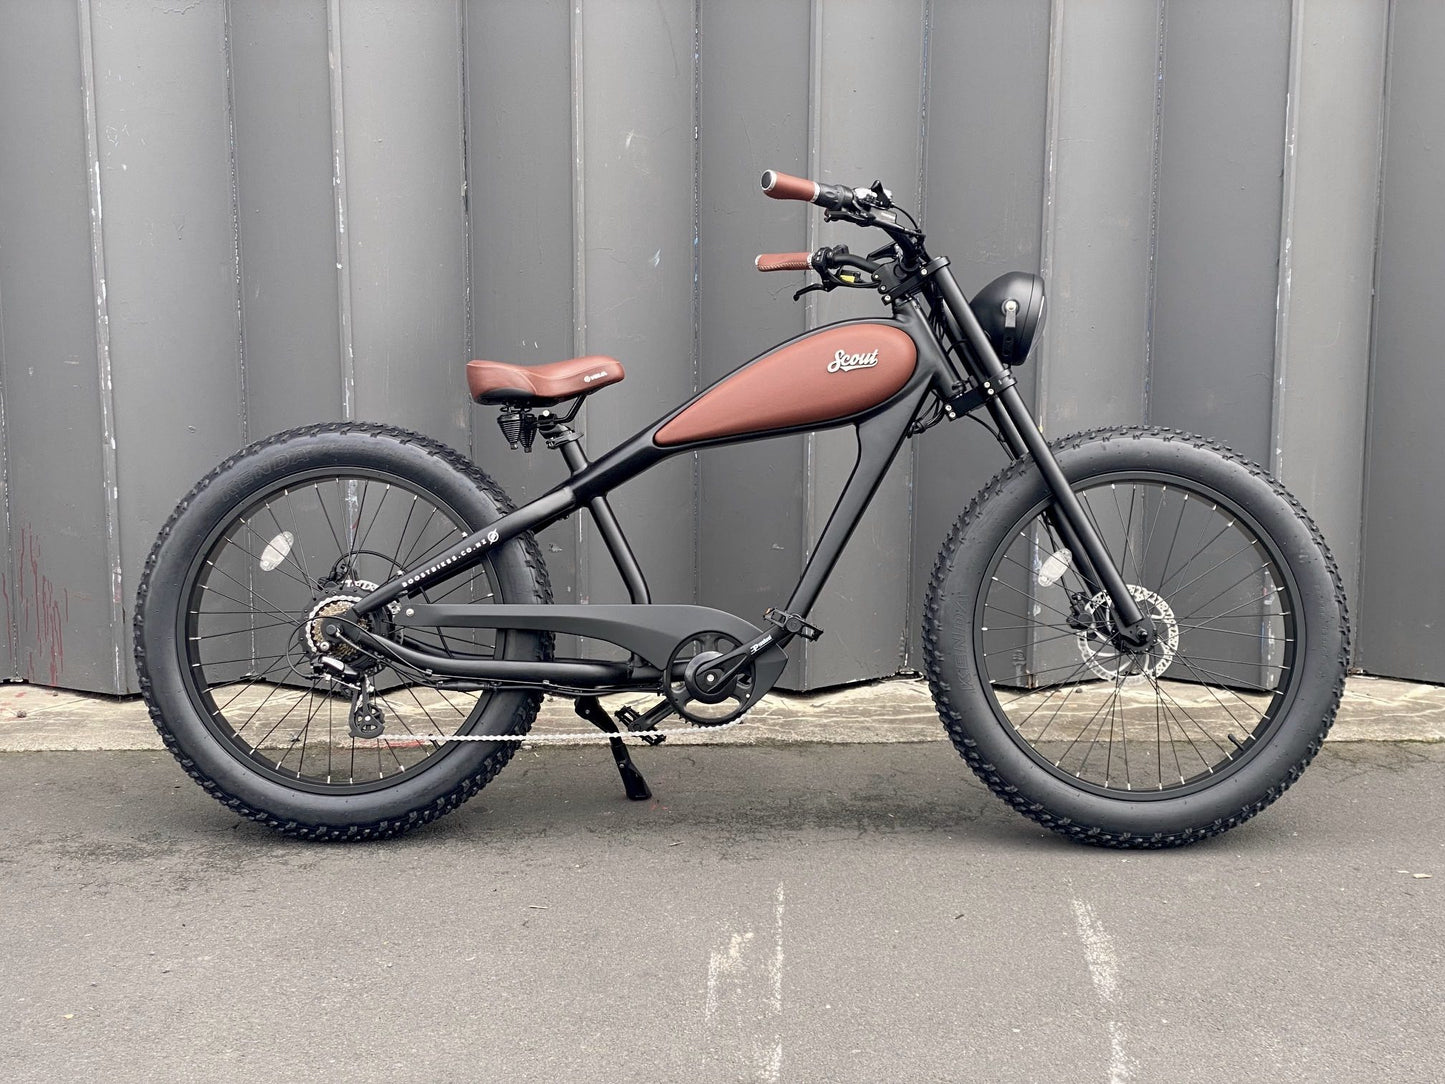 The Scout Electric Motorbike from Boostbikes. Classic Black and Tan detailing, matt black frame with tan vegan leather seat, tank and grips with Kenda All Terrain tyres. Front Suspension available as an option.